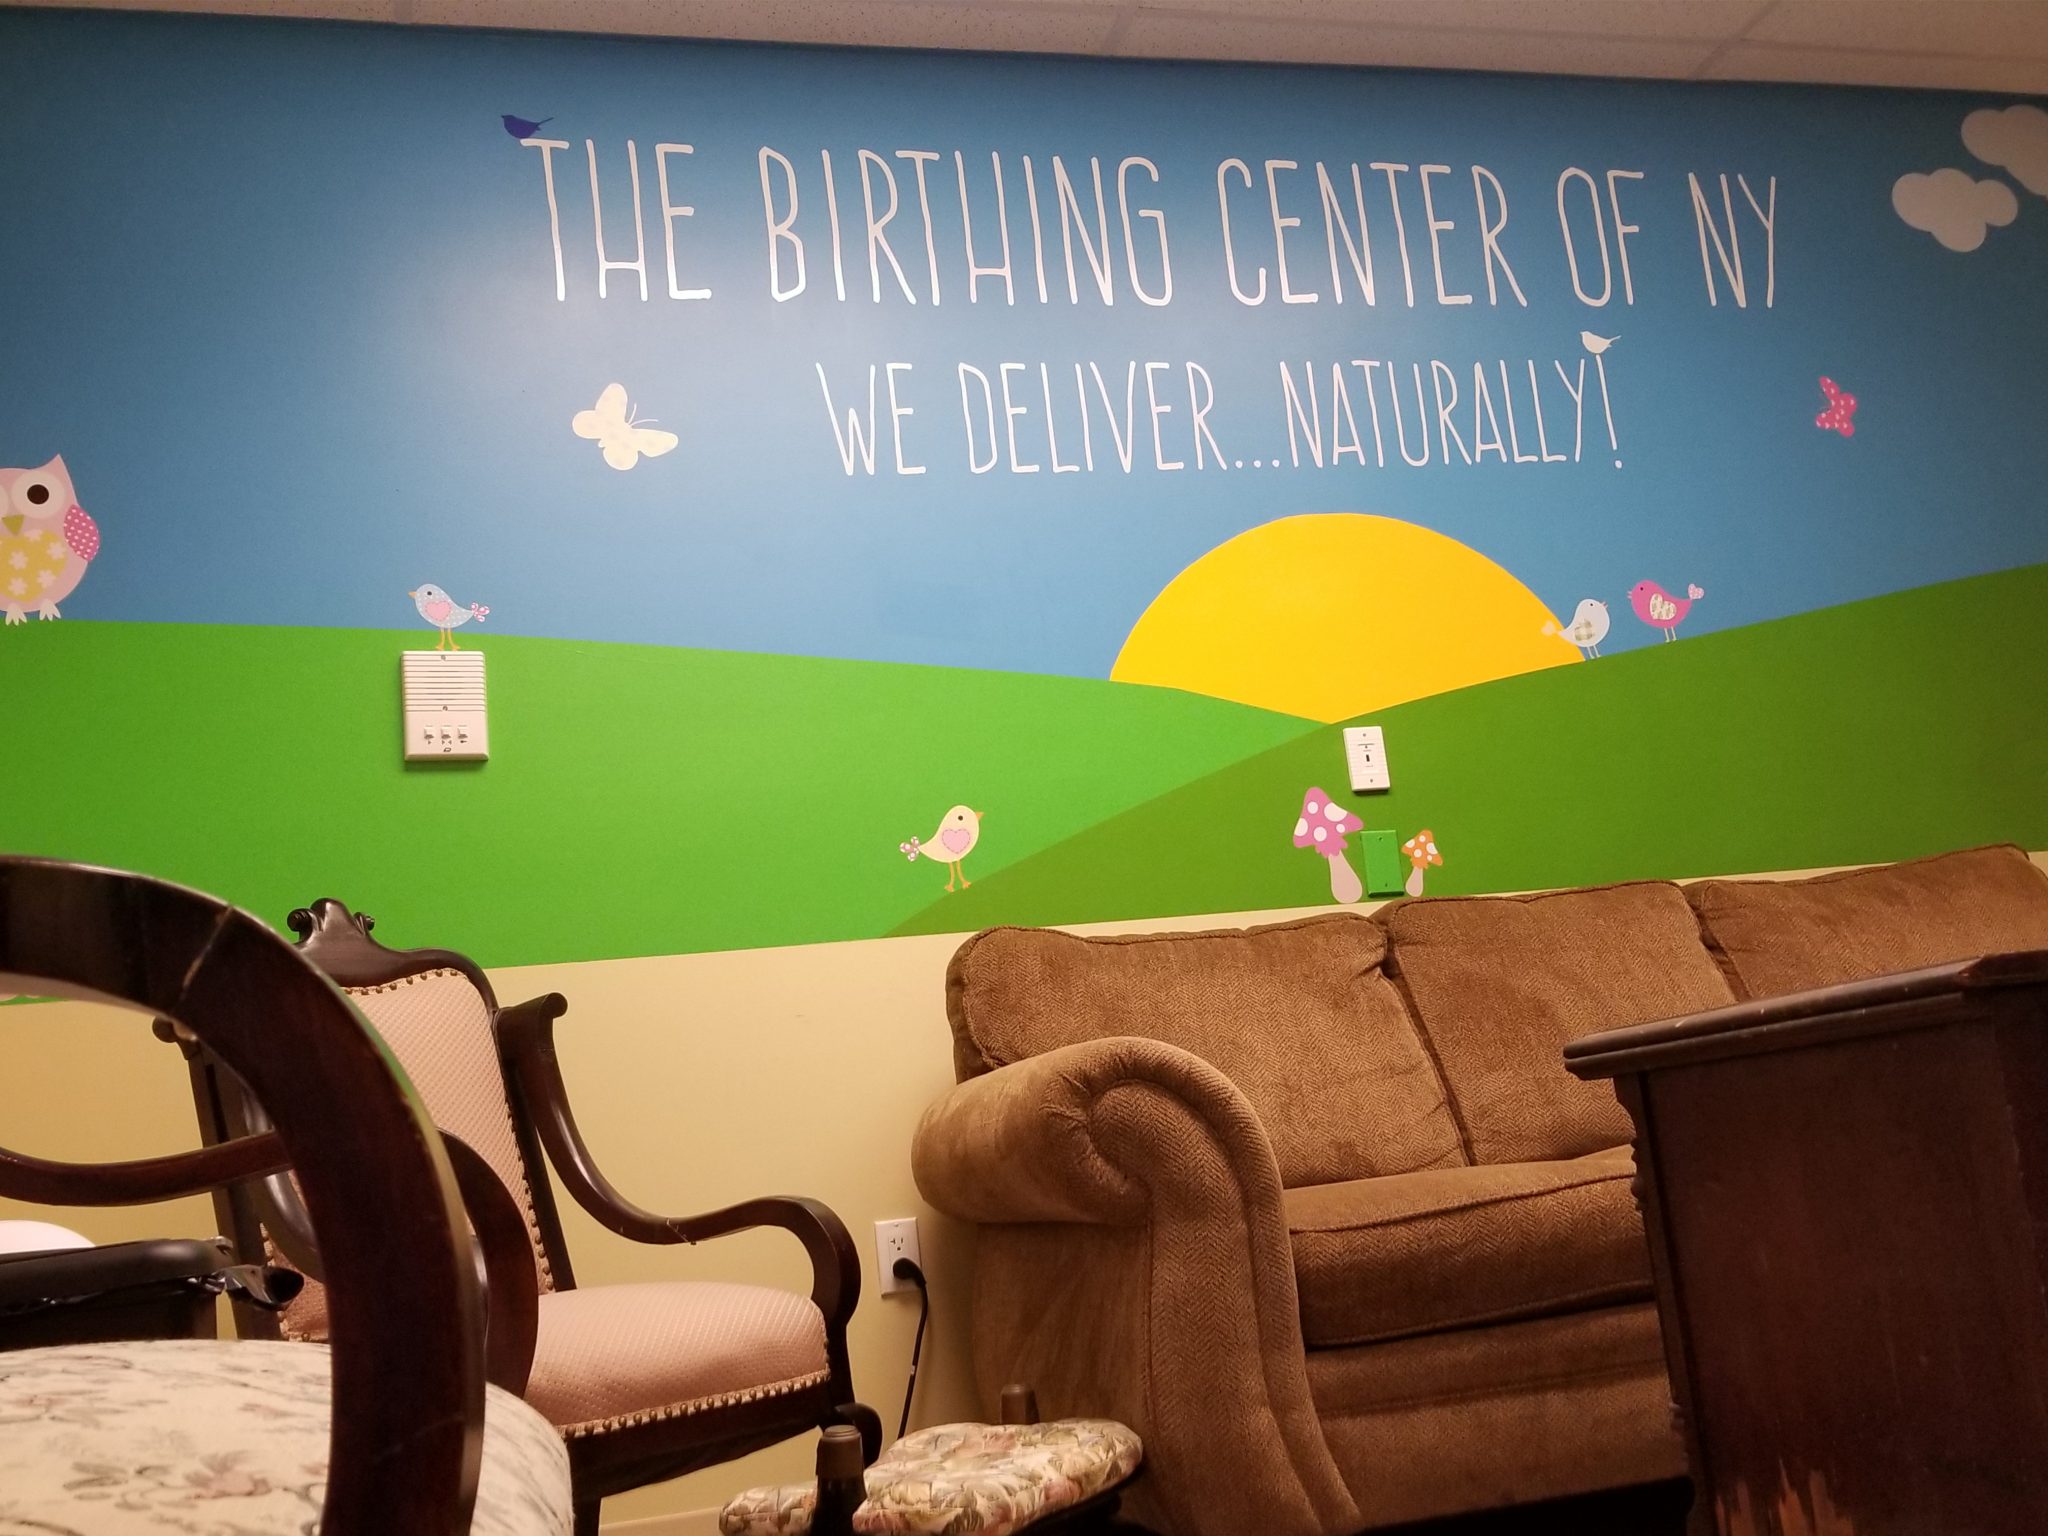 Reception Area at The Birthing Center of NY